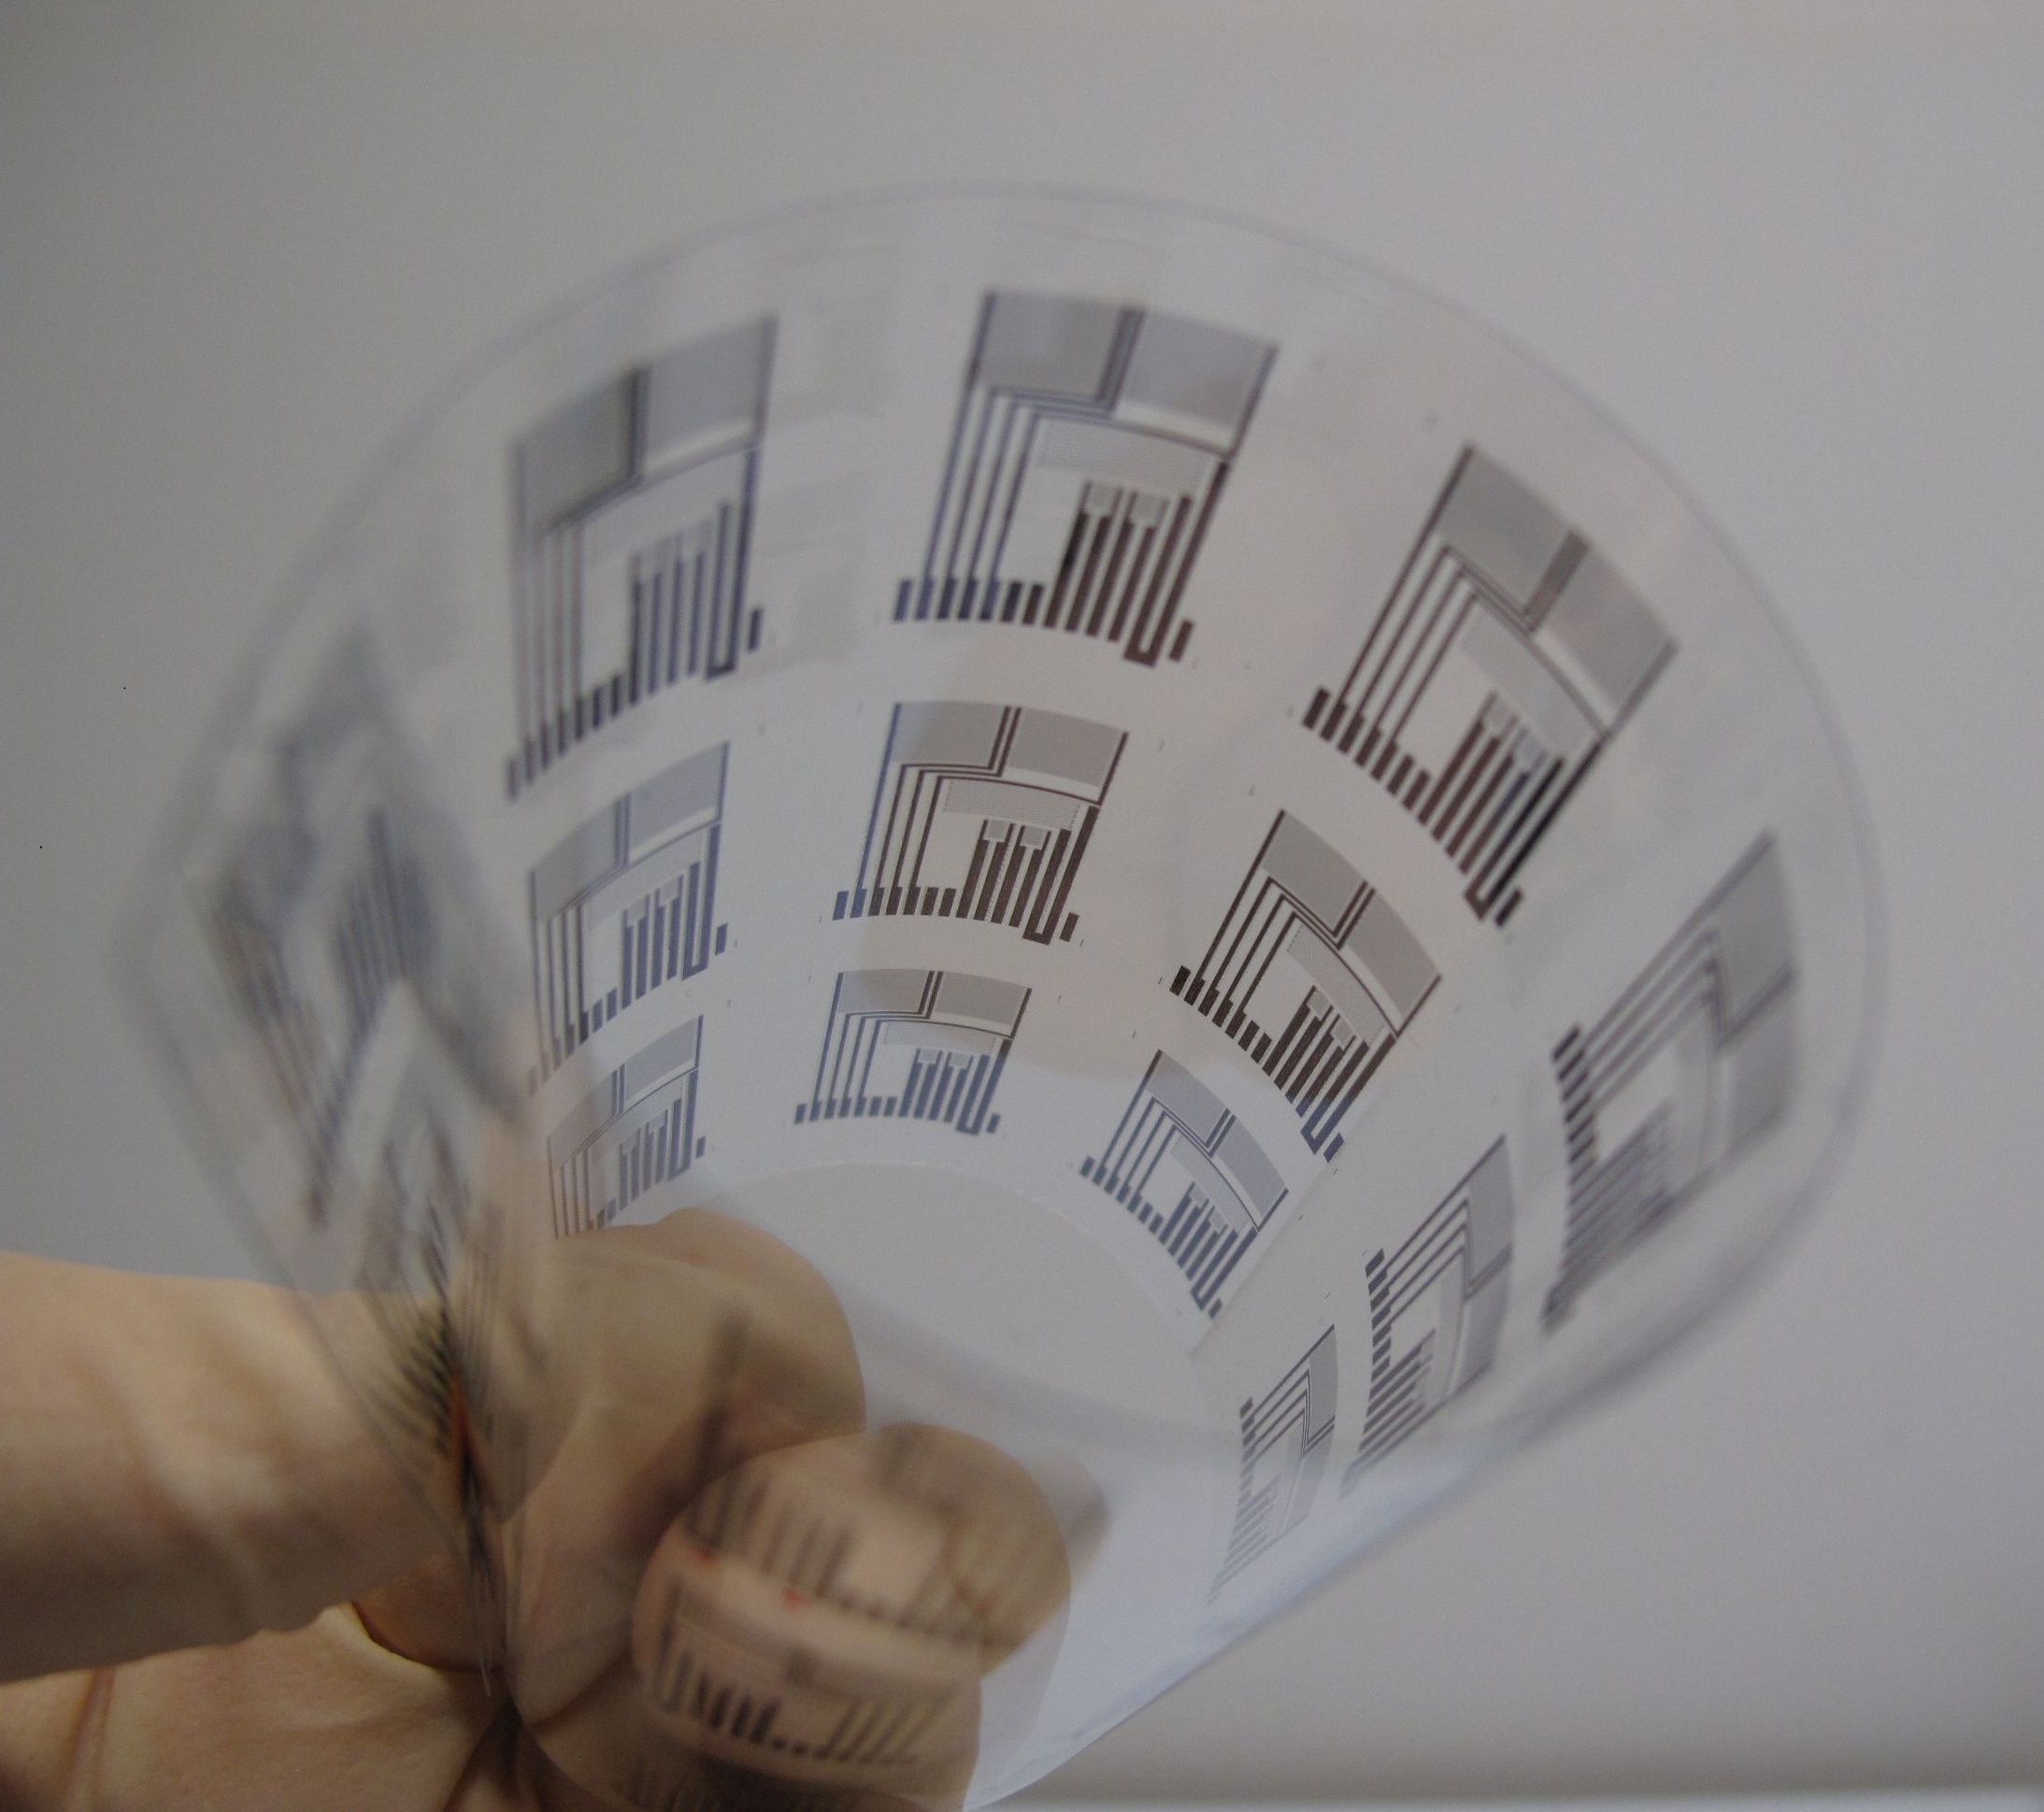 Figure 1 - Developed as part of the FlexSmell project is a flexible multi-sensor array fabricated on polymeric foil. The idea is for sensors to ‘smell’ food freshness as well as providing traceability